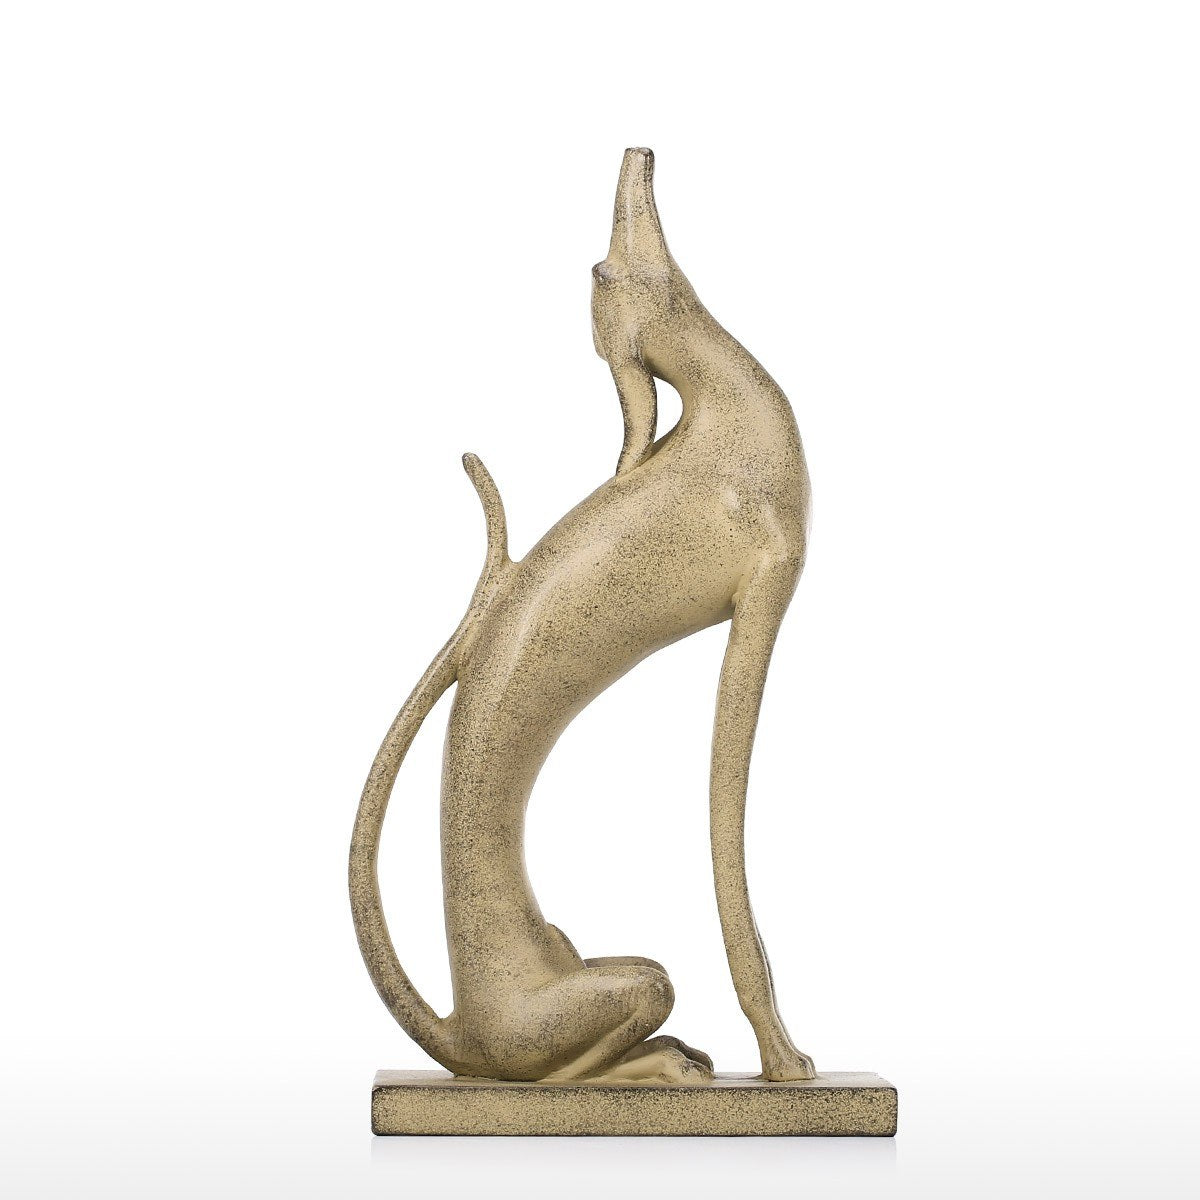 Gifts for Dog Owners and Gifts for Dog Lovers with Dog Sculpture  for Christmas Decorations